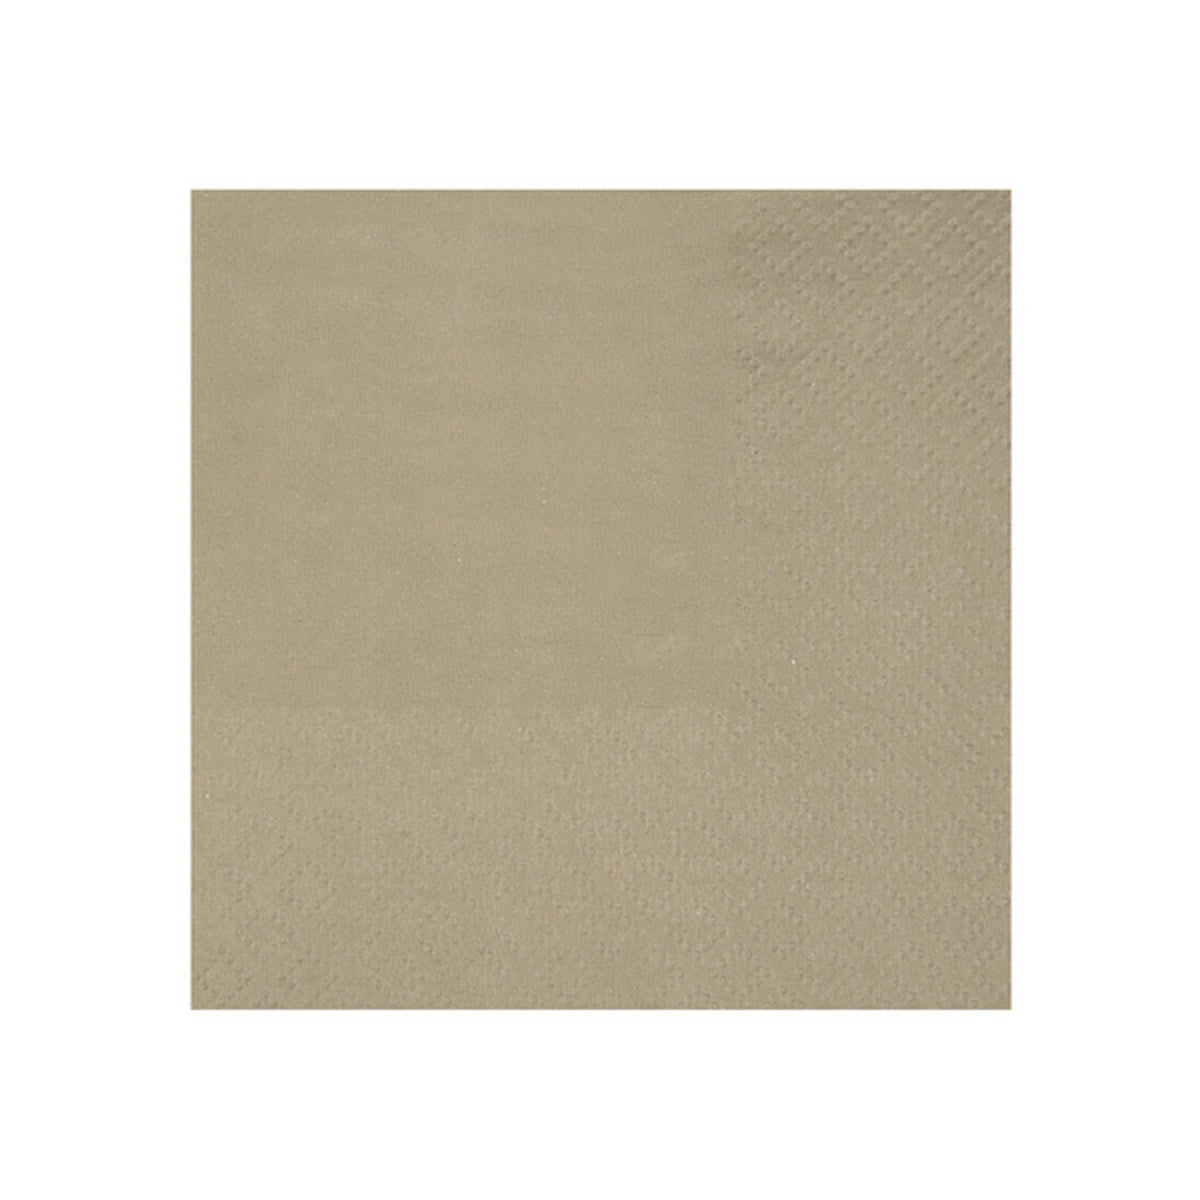 SANTEX Everyday Entertaining Taupe Brown Small Beverage Napkins, 25 Count 3660380078906